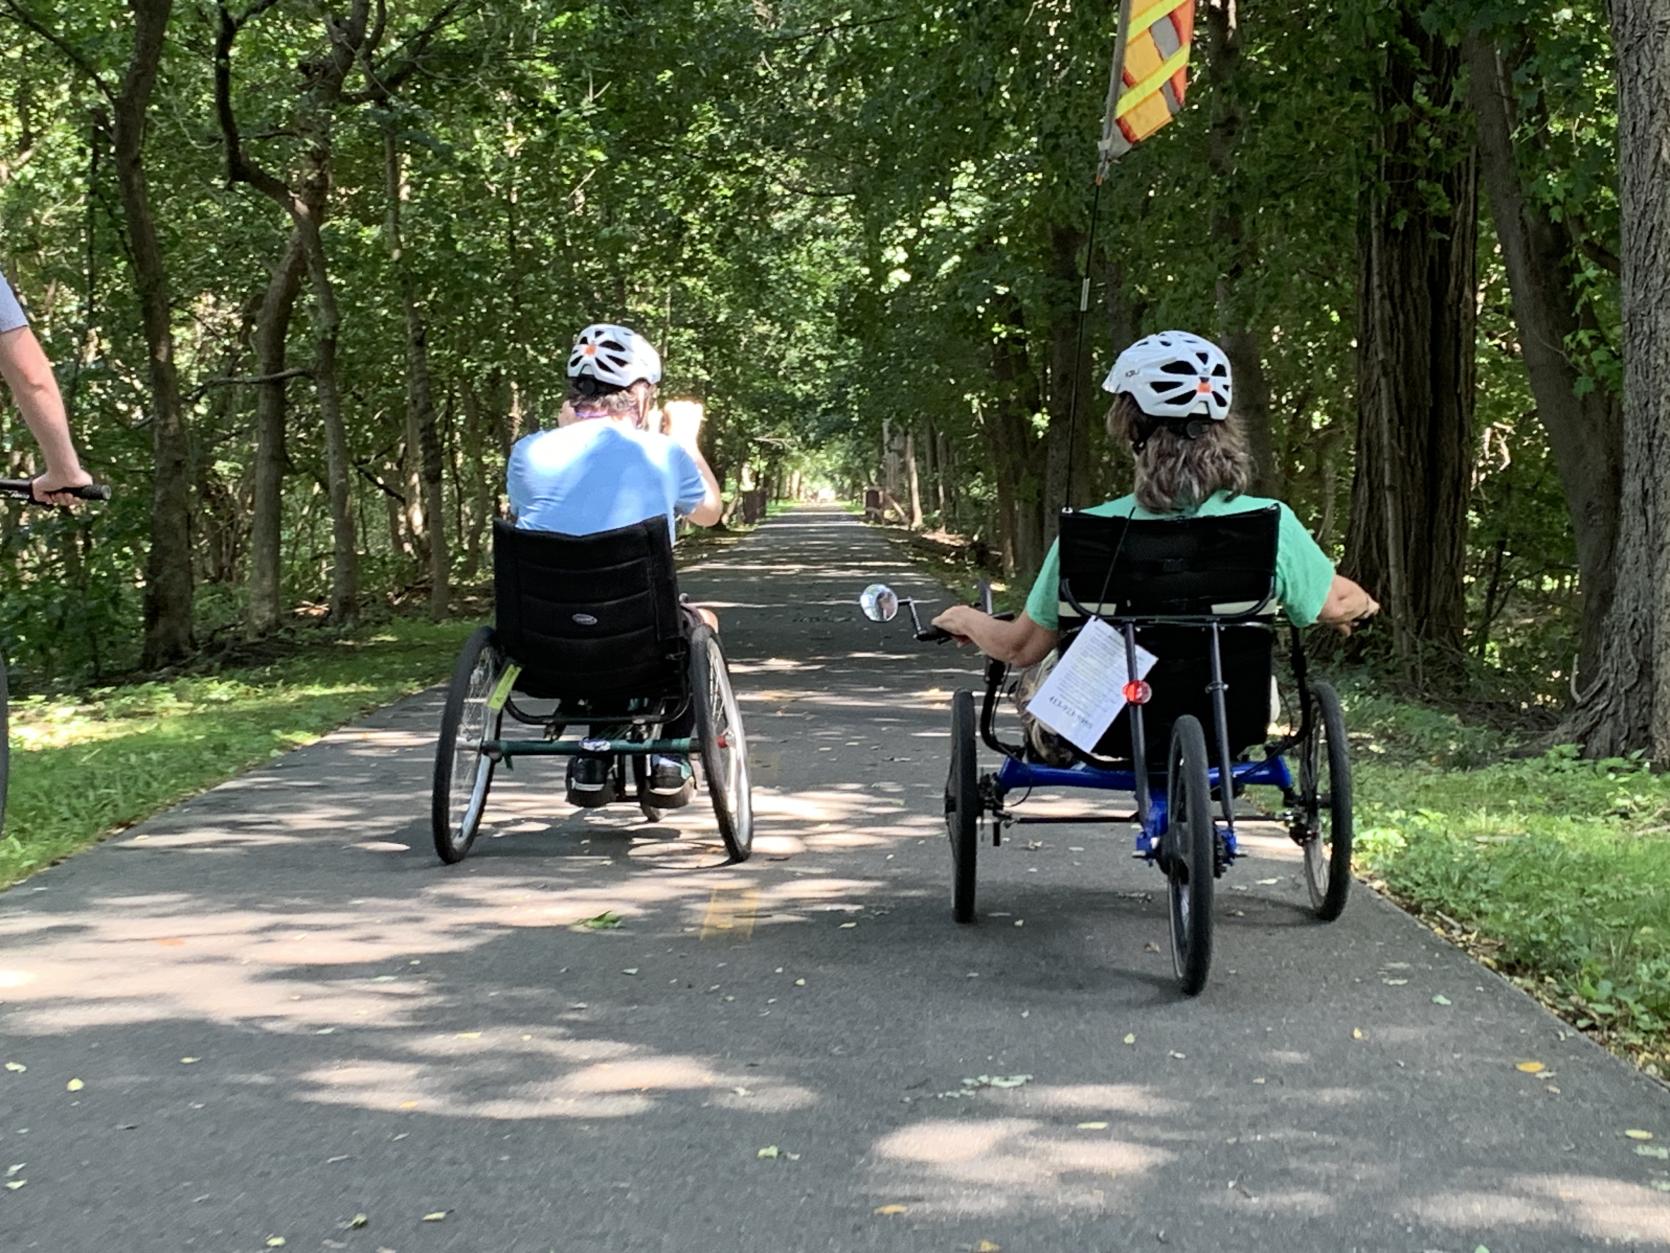 two individuals riding an adaptive cycles on a paved path